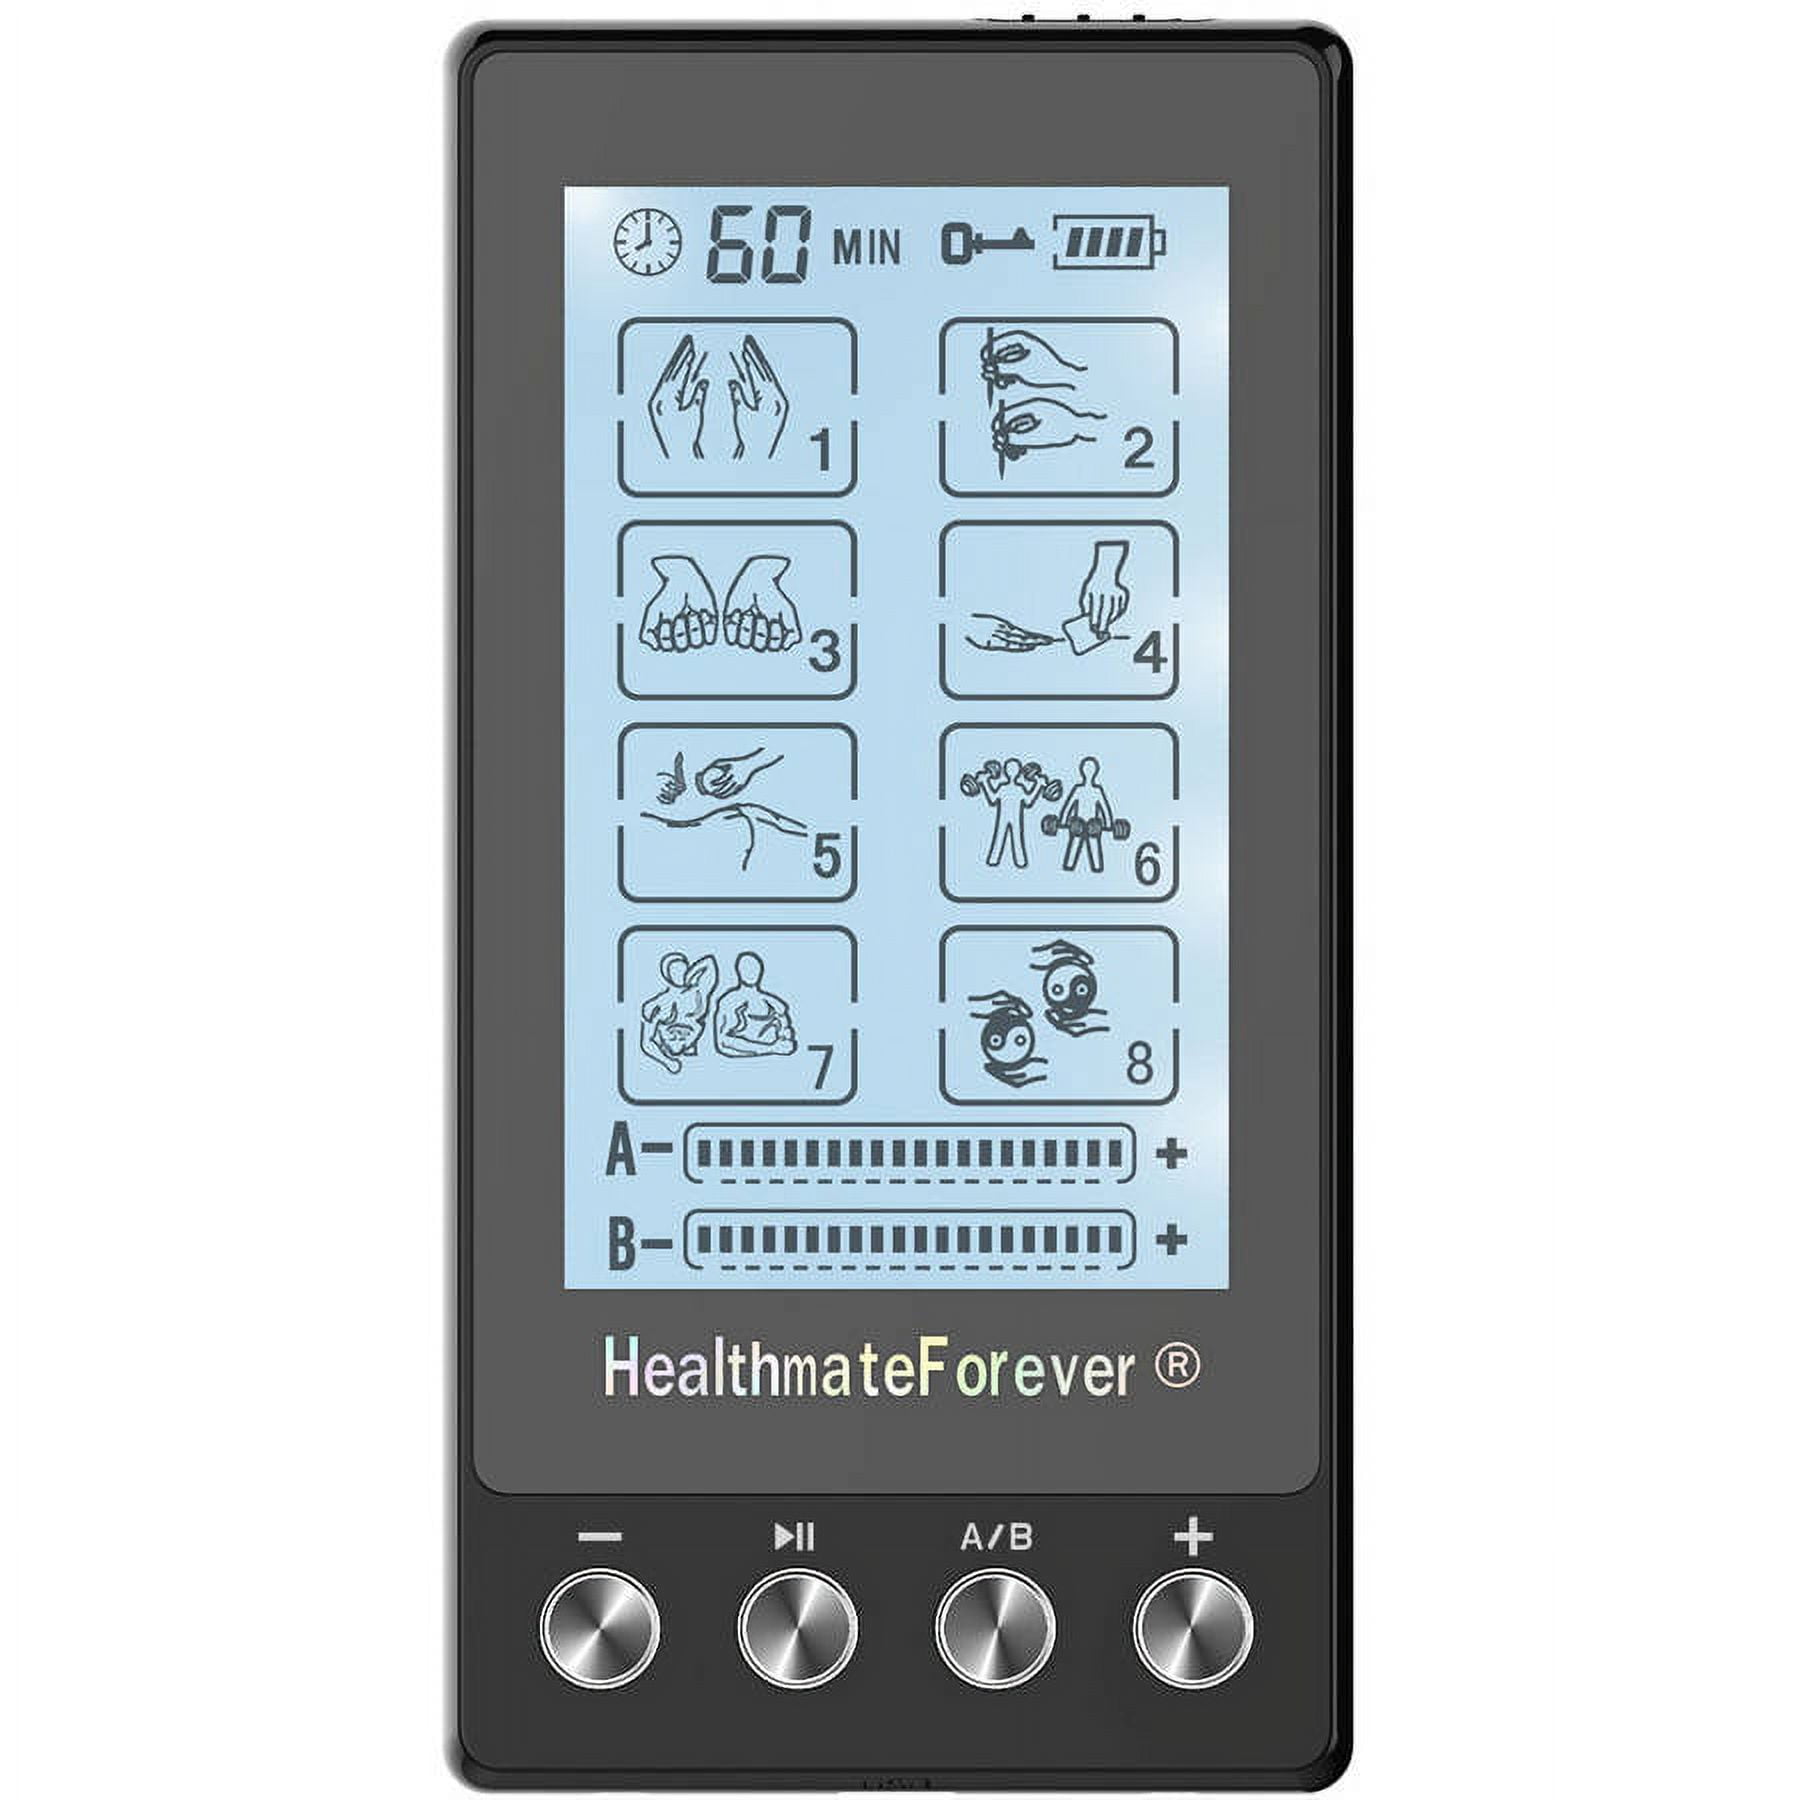 Healthmate forever TENS Unit EMS Muscle Stimulator lot 2